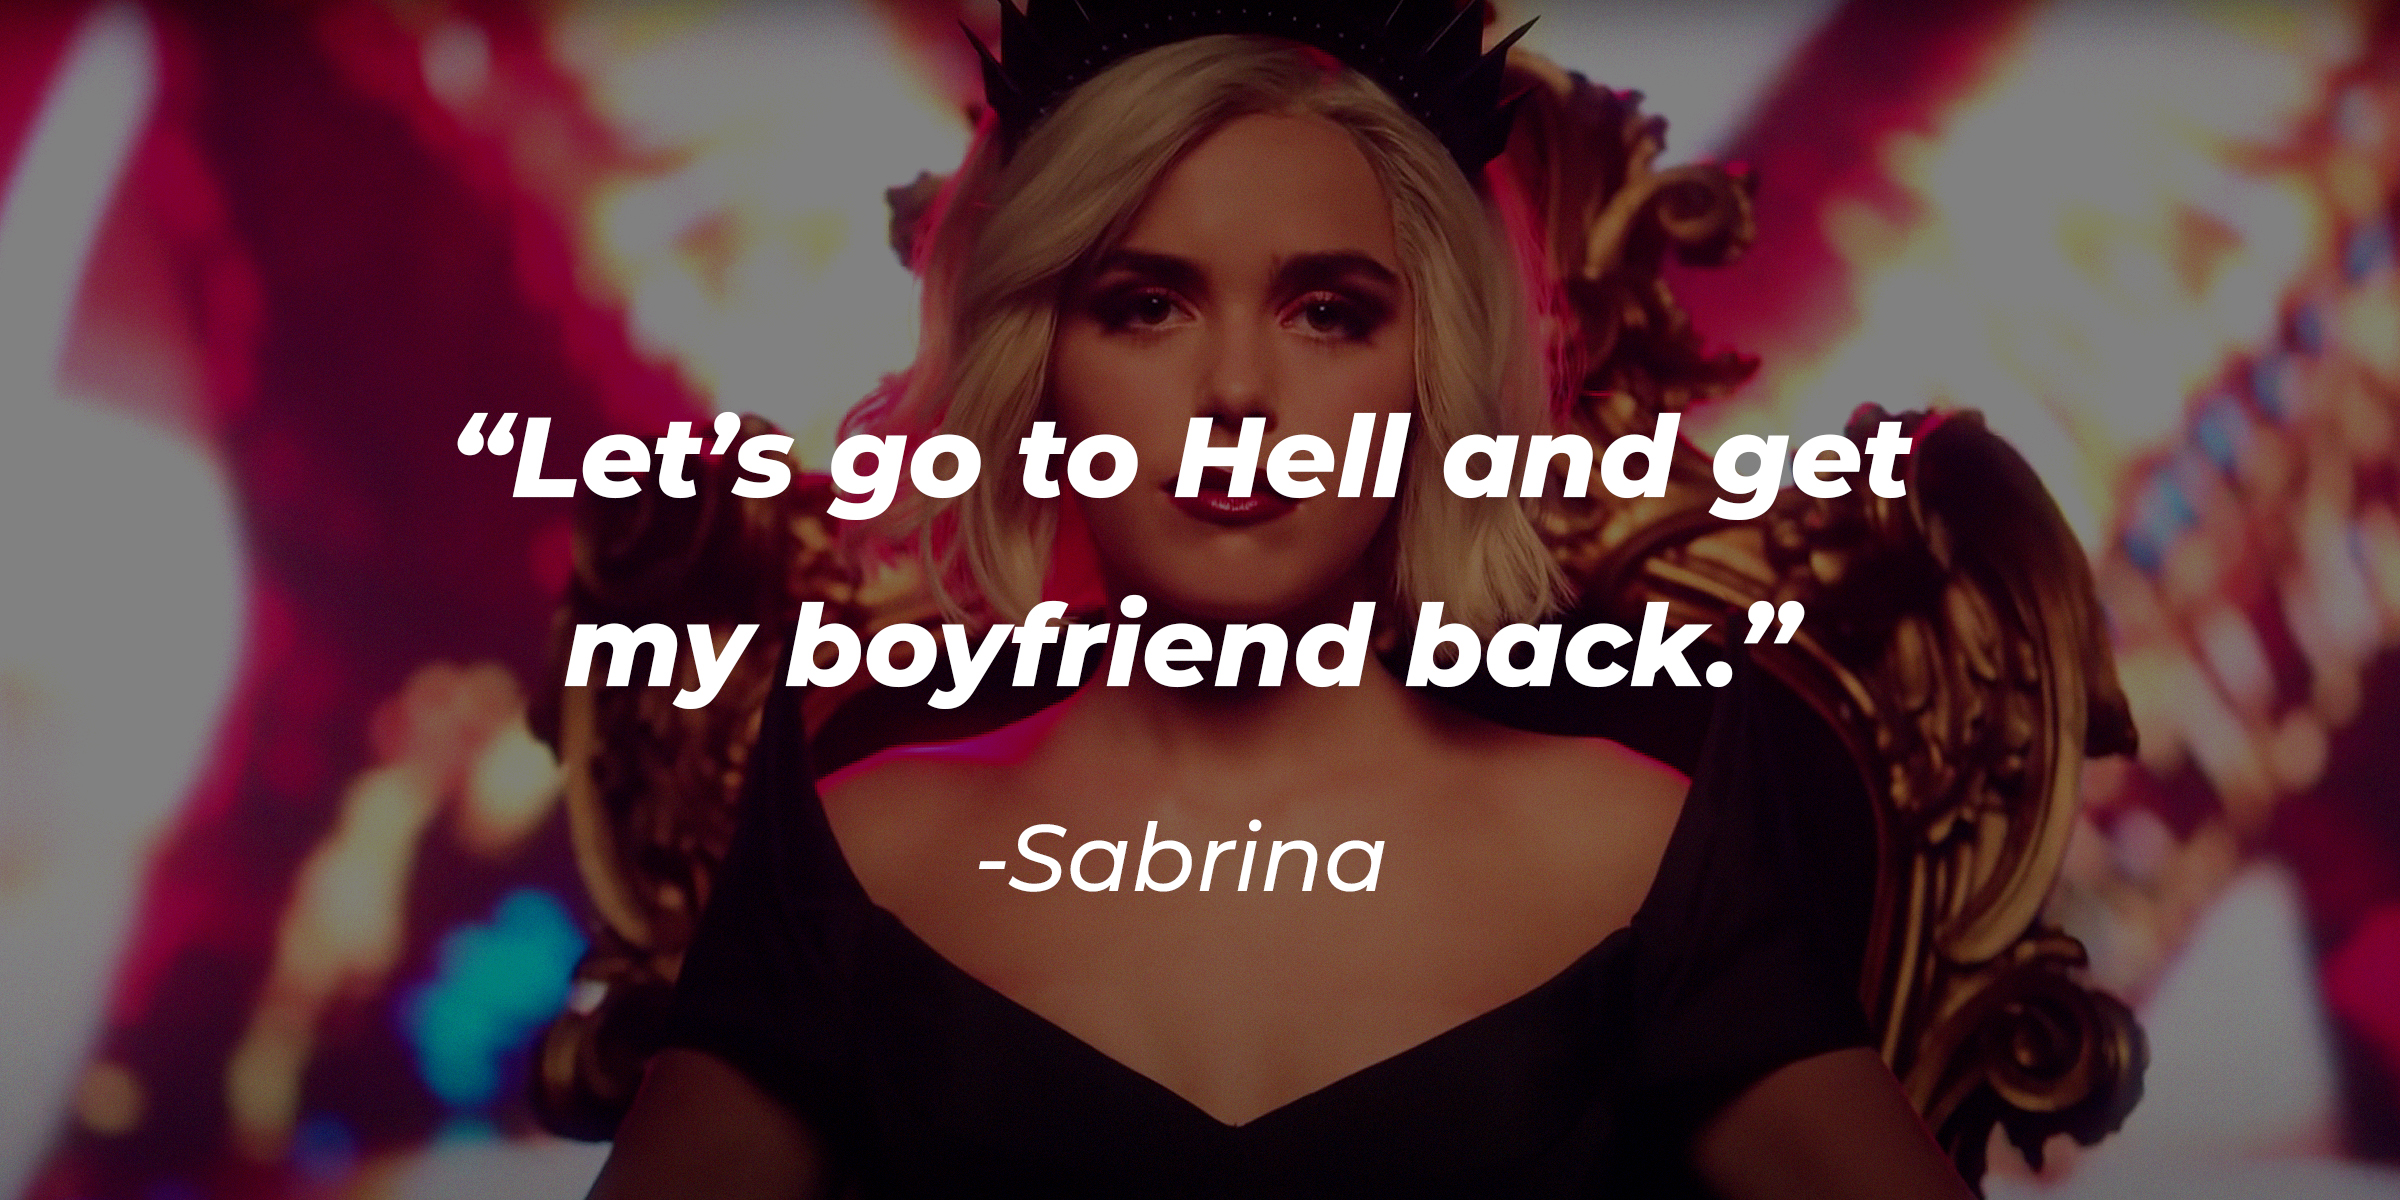 A photo of Sabrina with Sabrina's quote: “Let’s go to Hell and get my boyfriend back.” | Source: youtube.com/Netflix